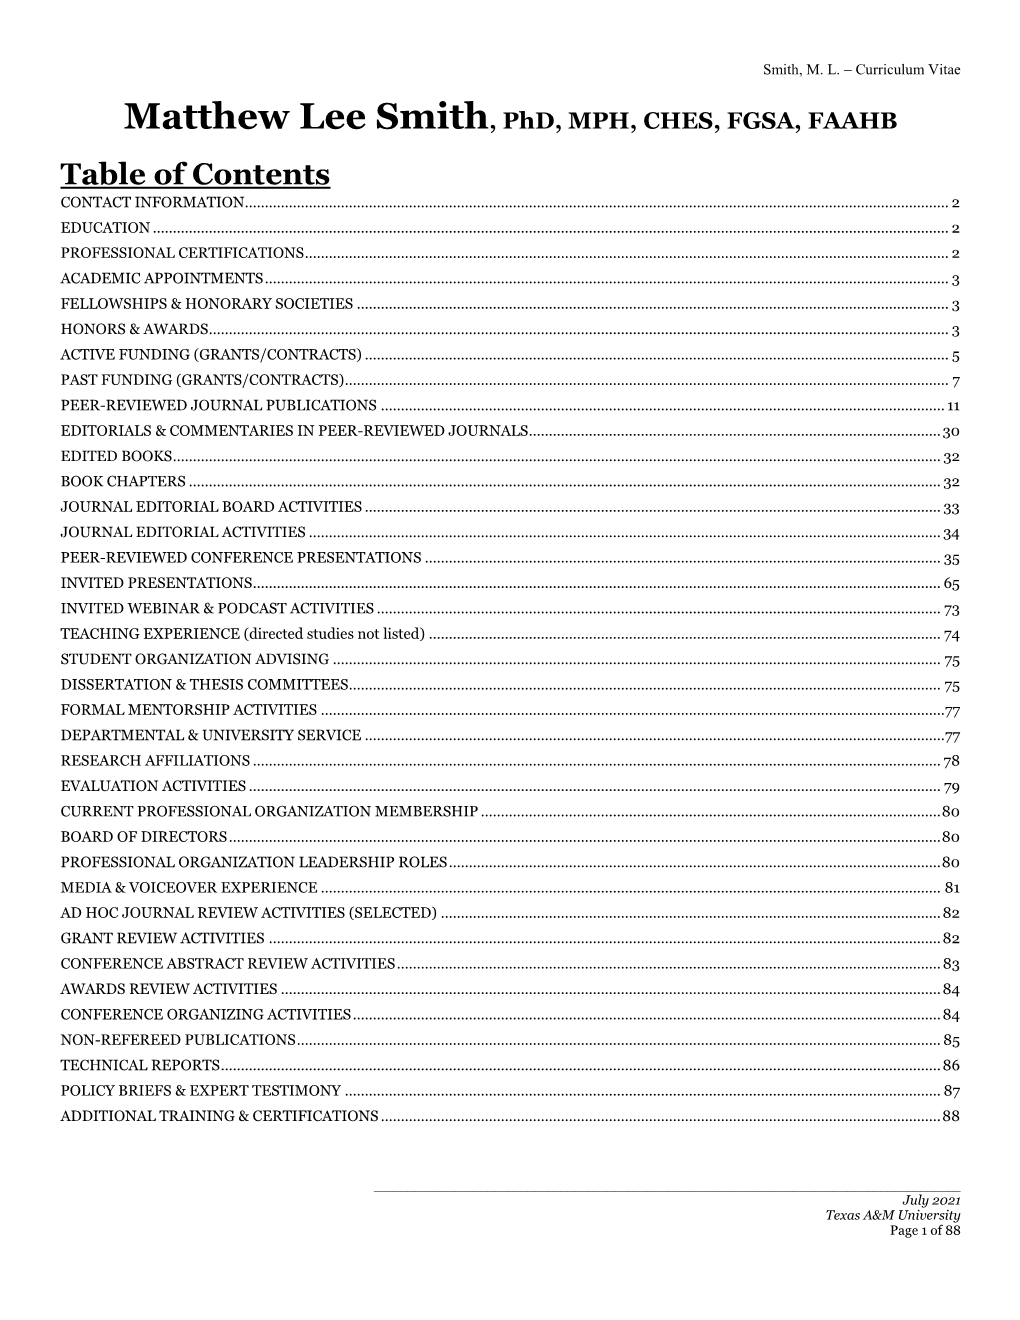 Table of Contents CONTACT INFORMATION